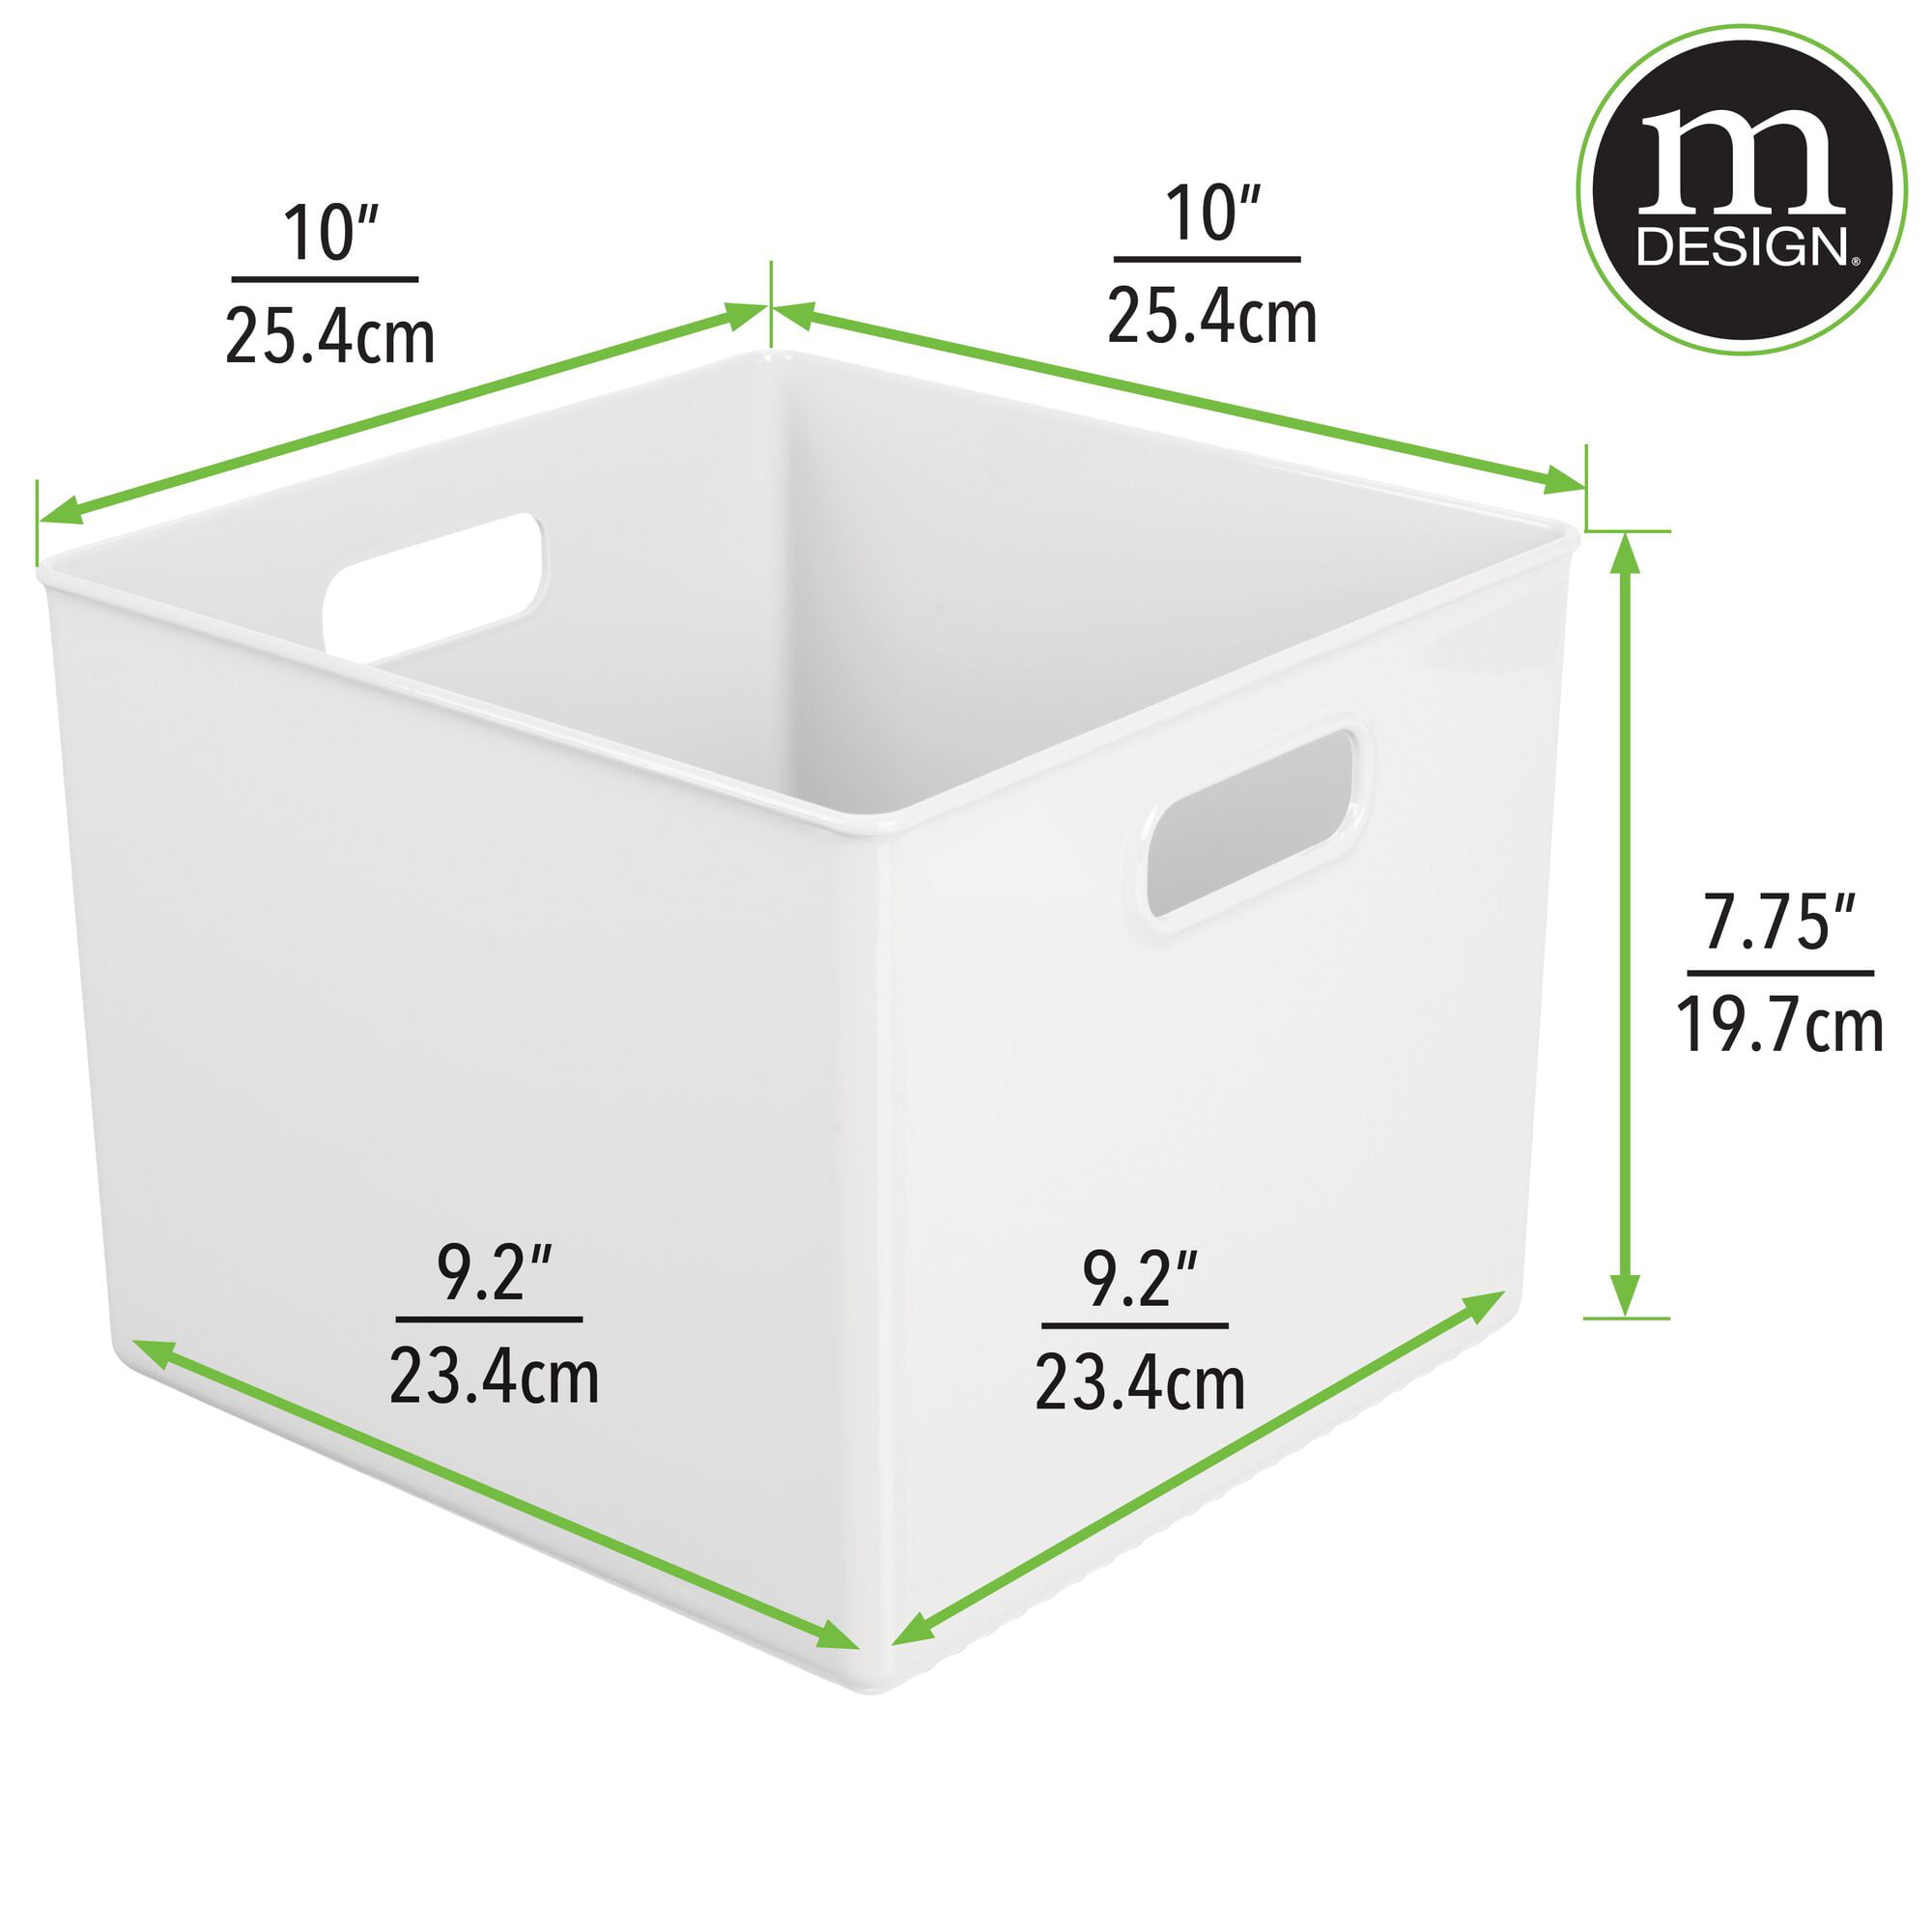 mDesign Small Plastic Office Storage Container Bins with Handles for  Organization in Filing Cabinet, Closet Shelf, or Desk Drawers, Organizer  for